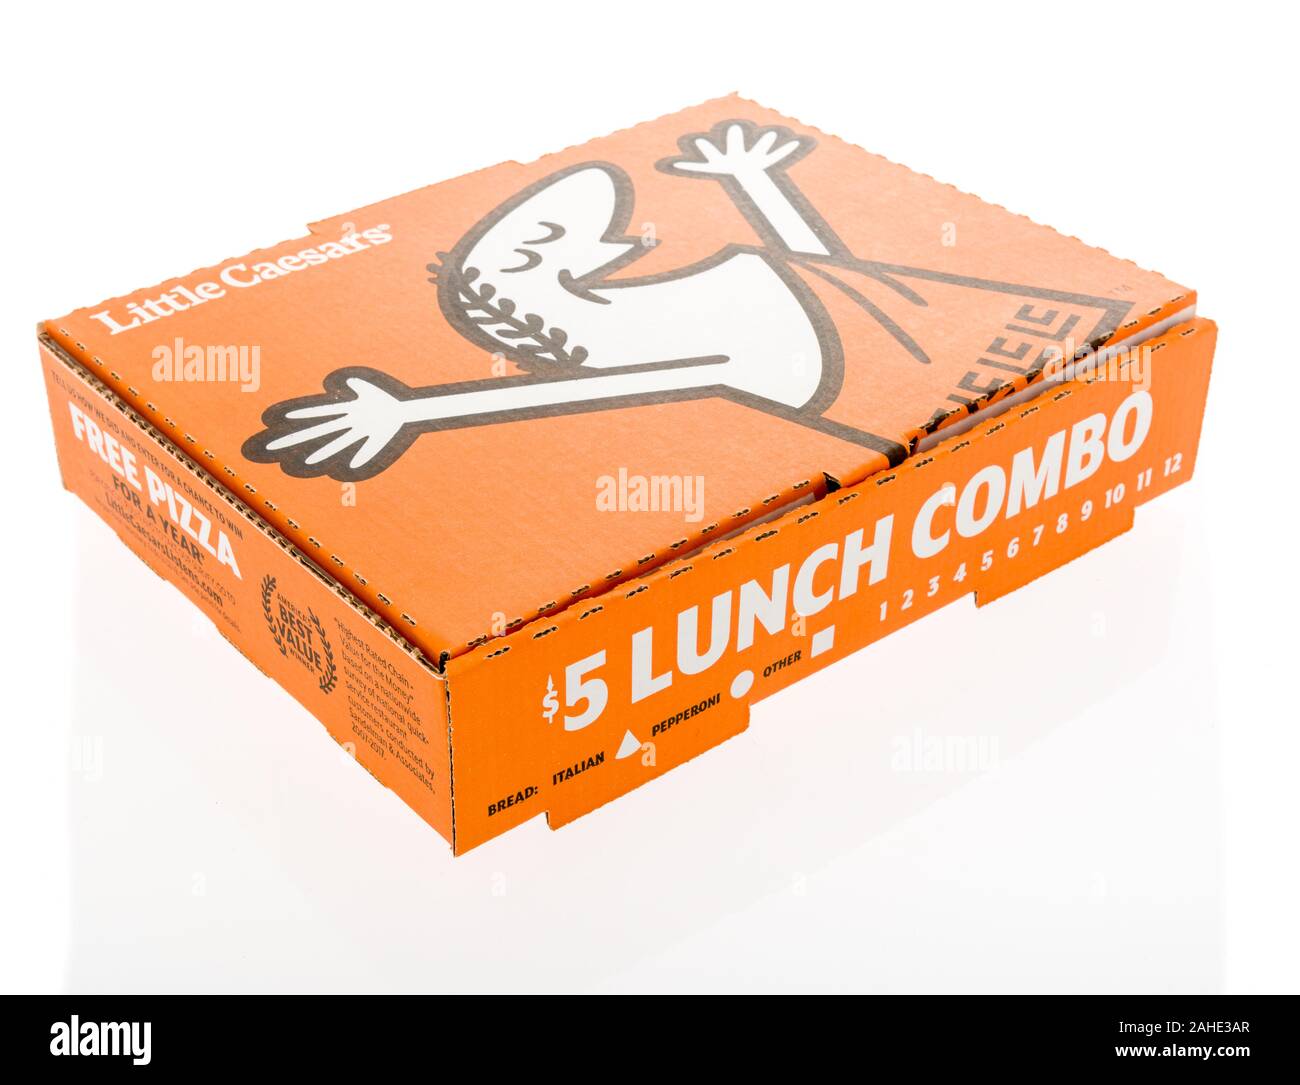 Winneconne, WI - 3 December 2019 : A package of little Caesars pizza 5 dollar lunch combo box on an isolated background Stock Photo